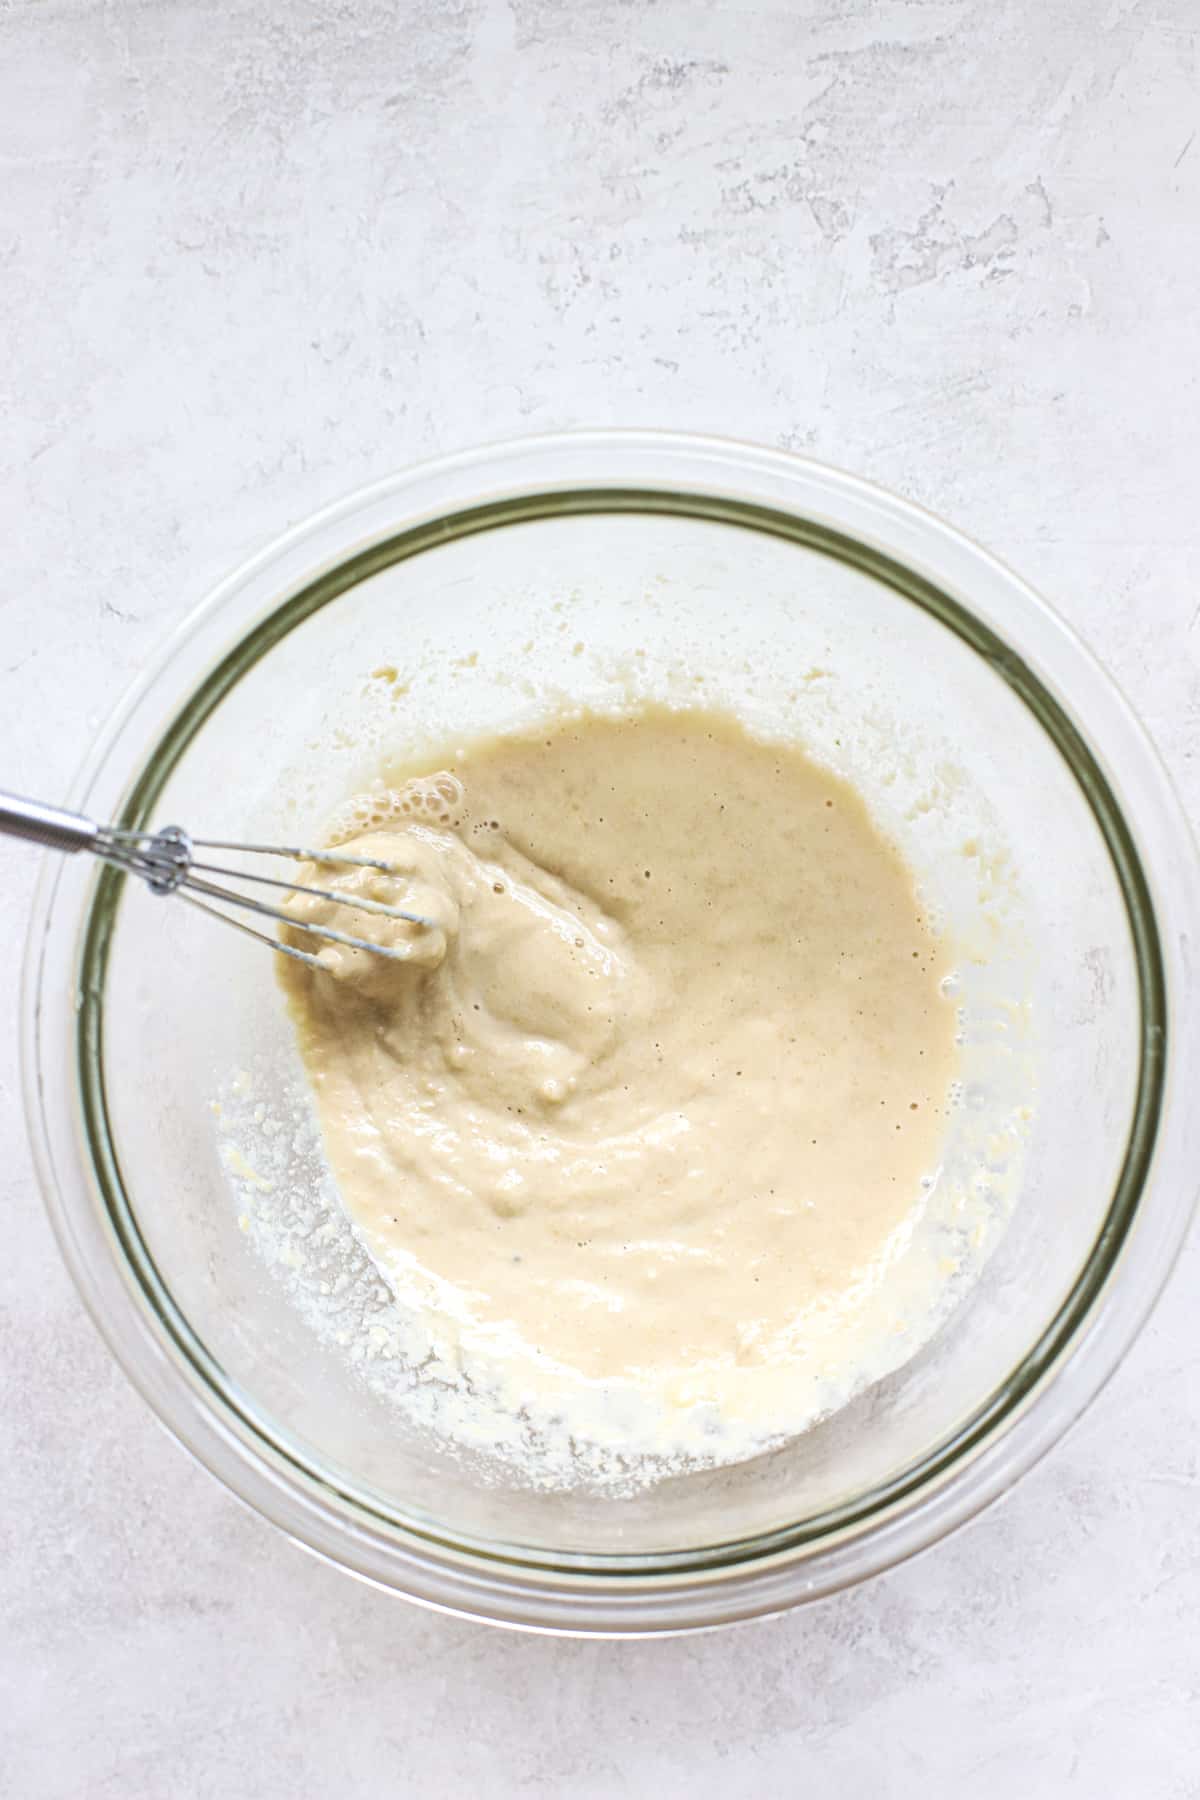 Tahini sauce being whisked together in clear glass bowl with mini whisk on gray and white surface